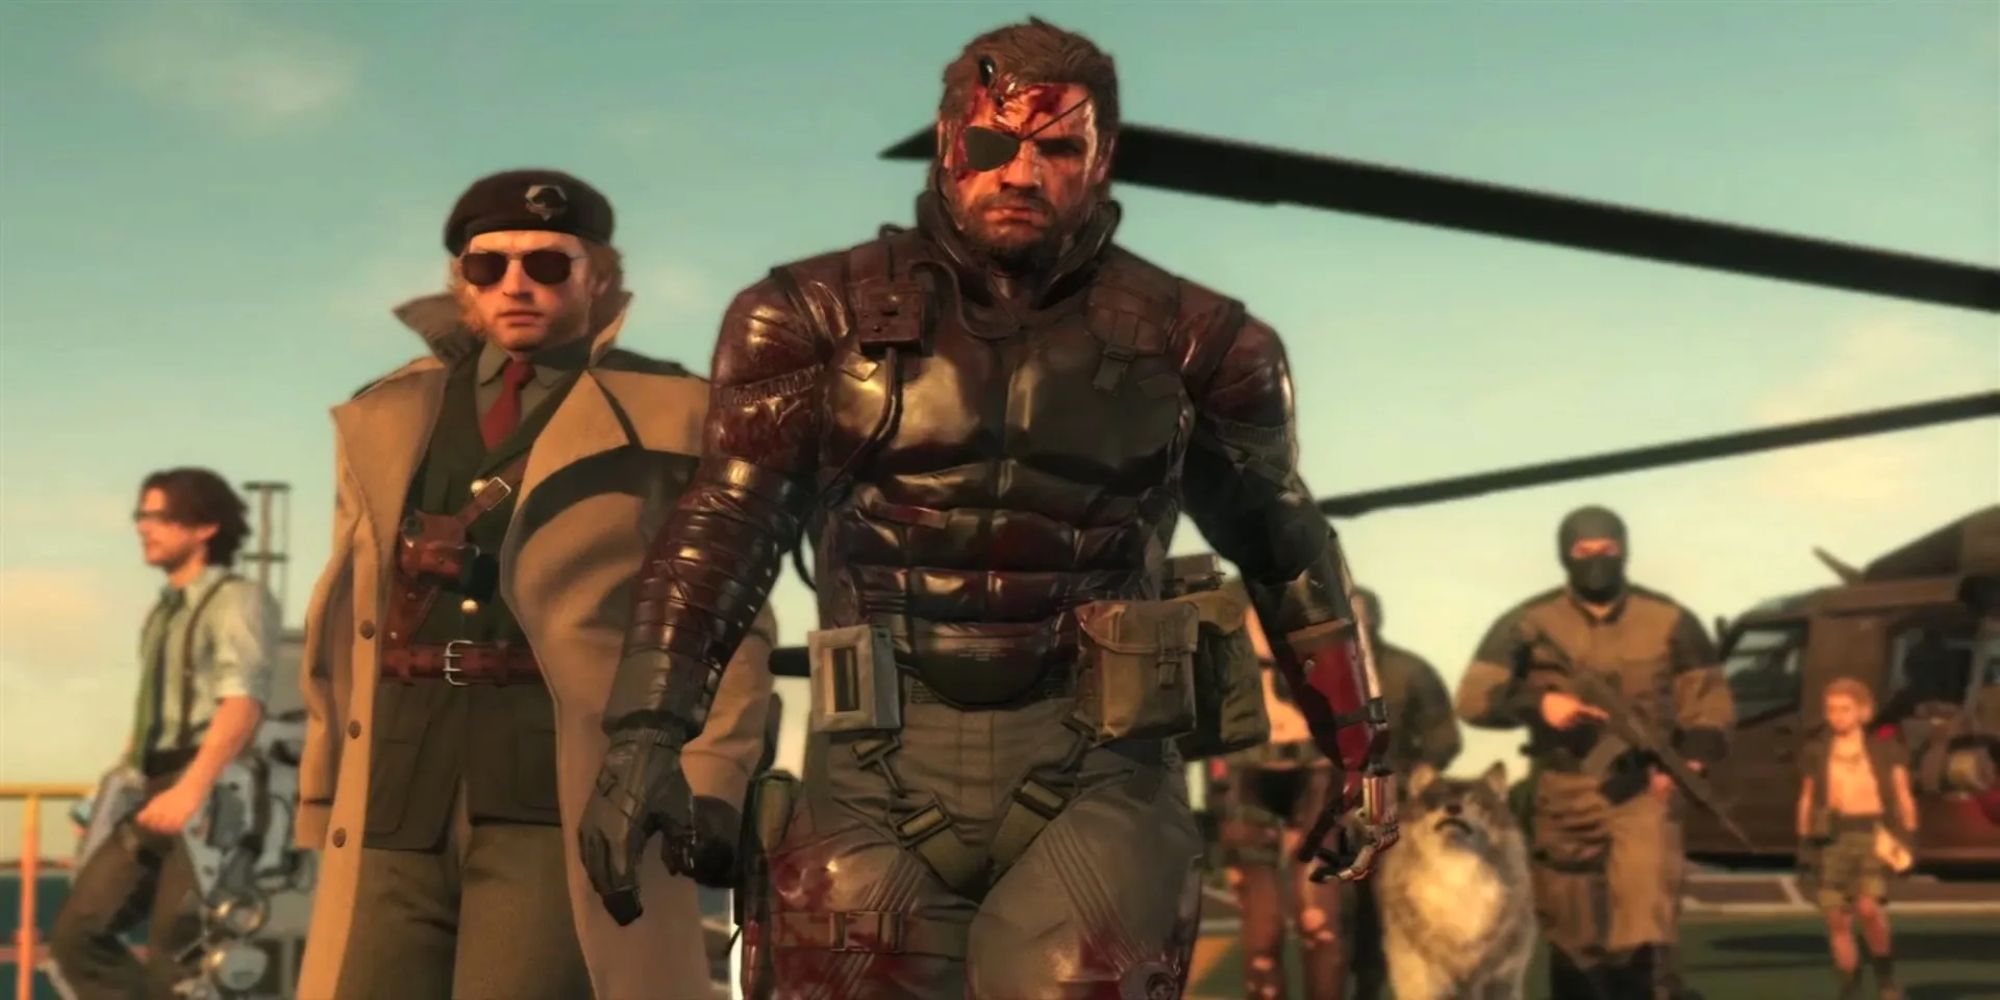 mgs 5 featured